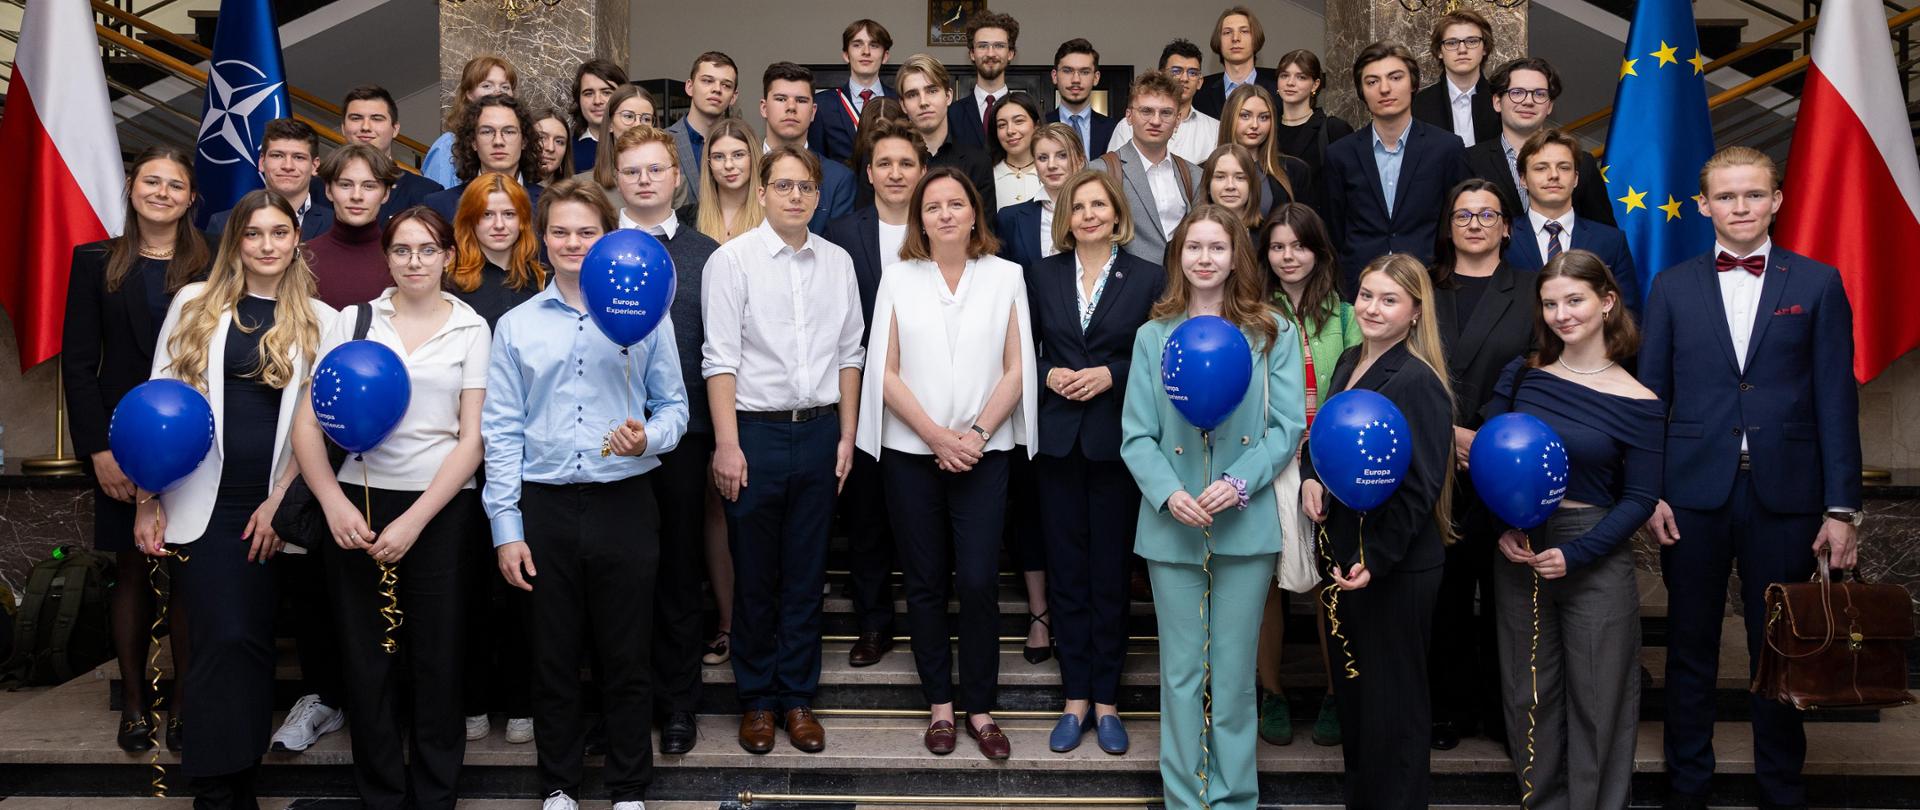 Deputy Minister Anna Radwan holds debate with students to mark Poland’s 20 years in European Union